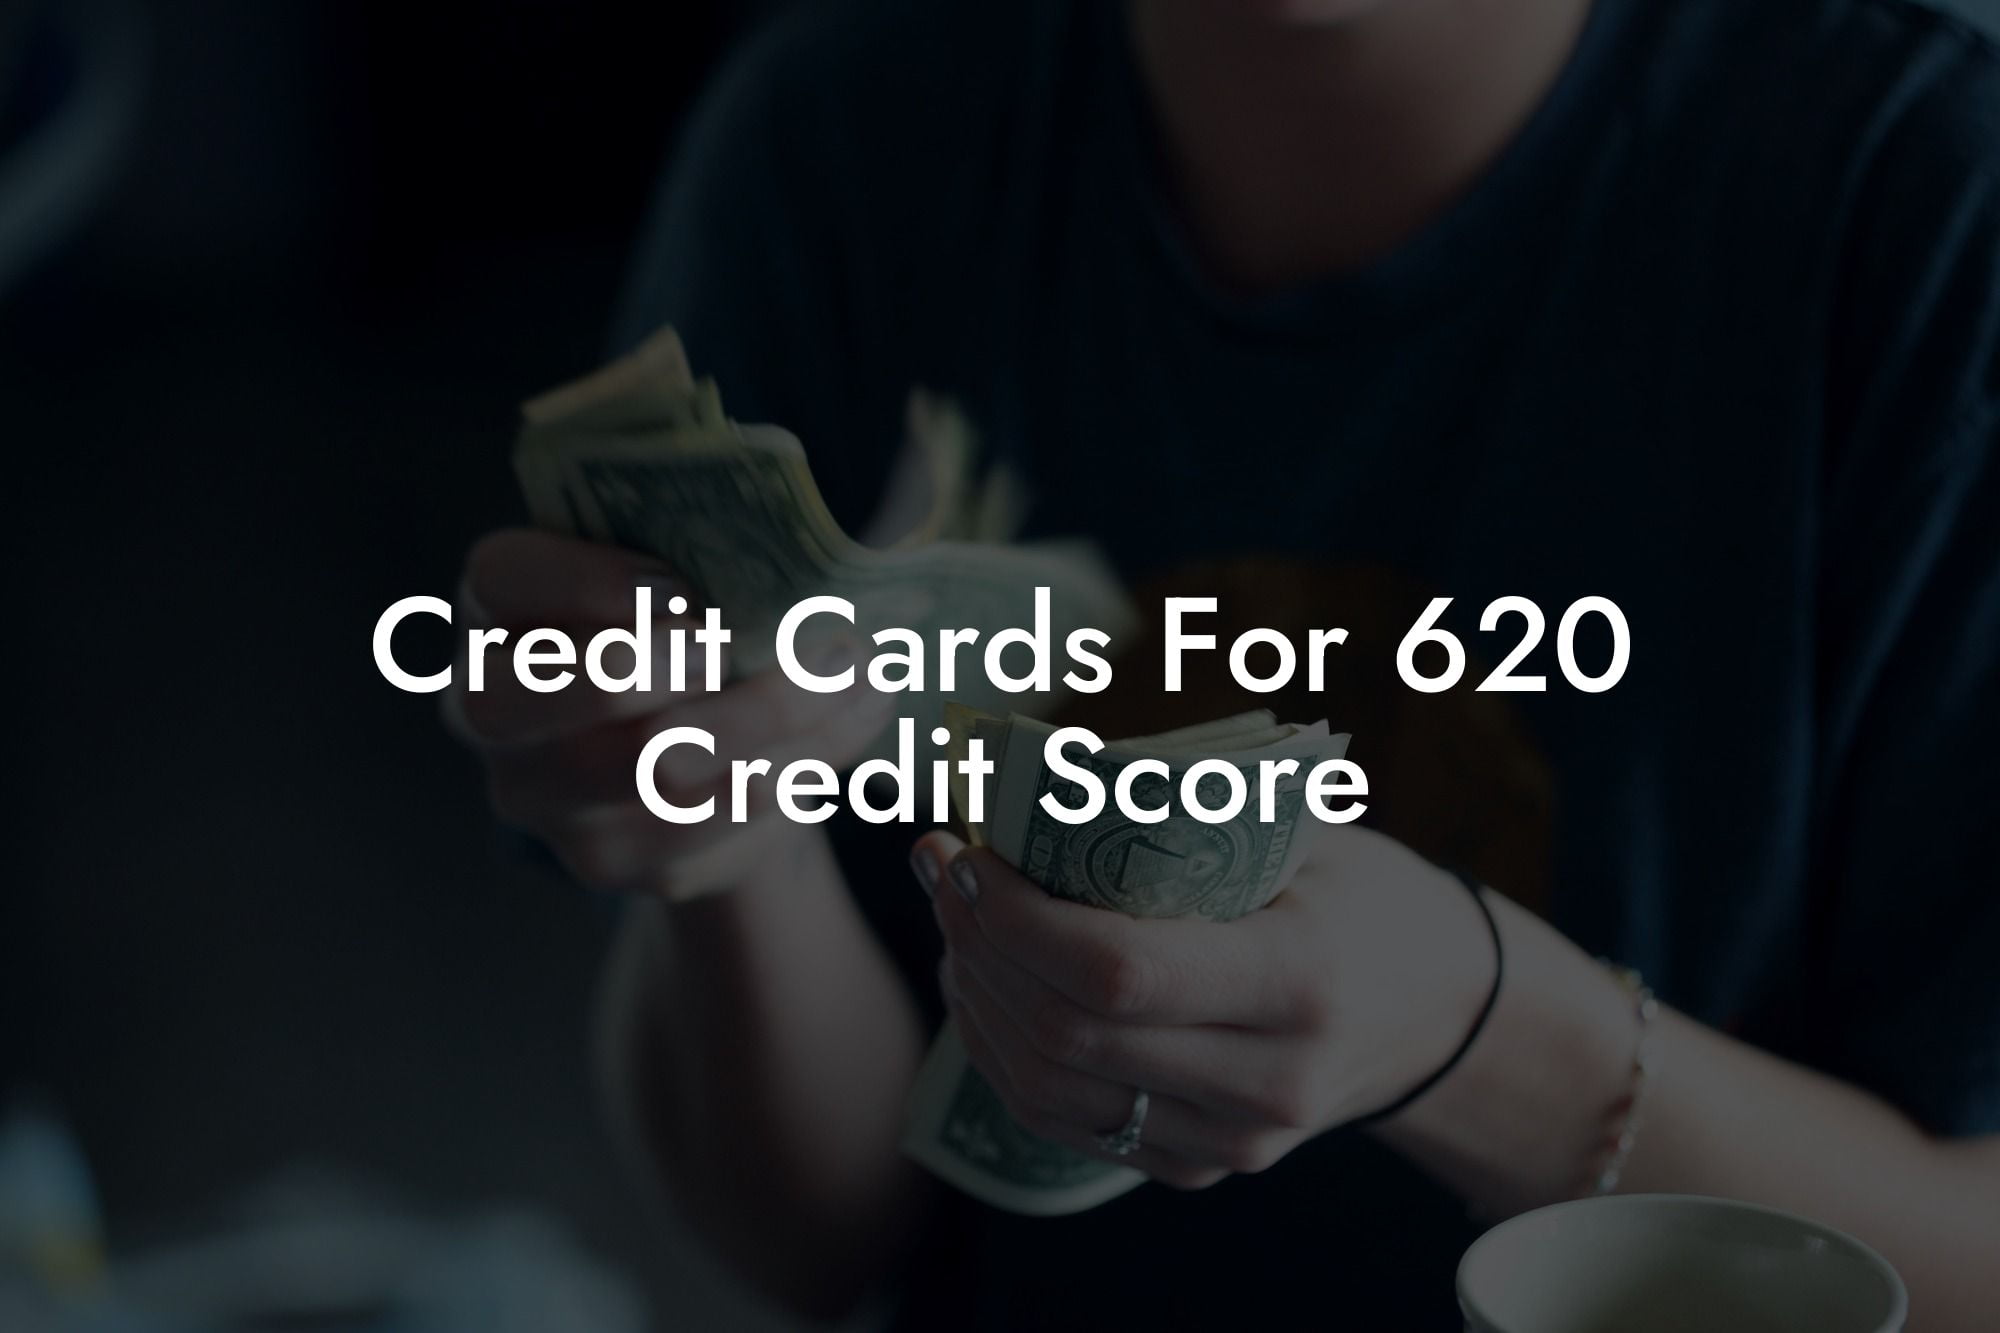 Credit Cards For 620 Credit Score